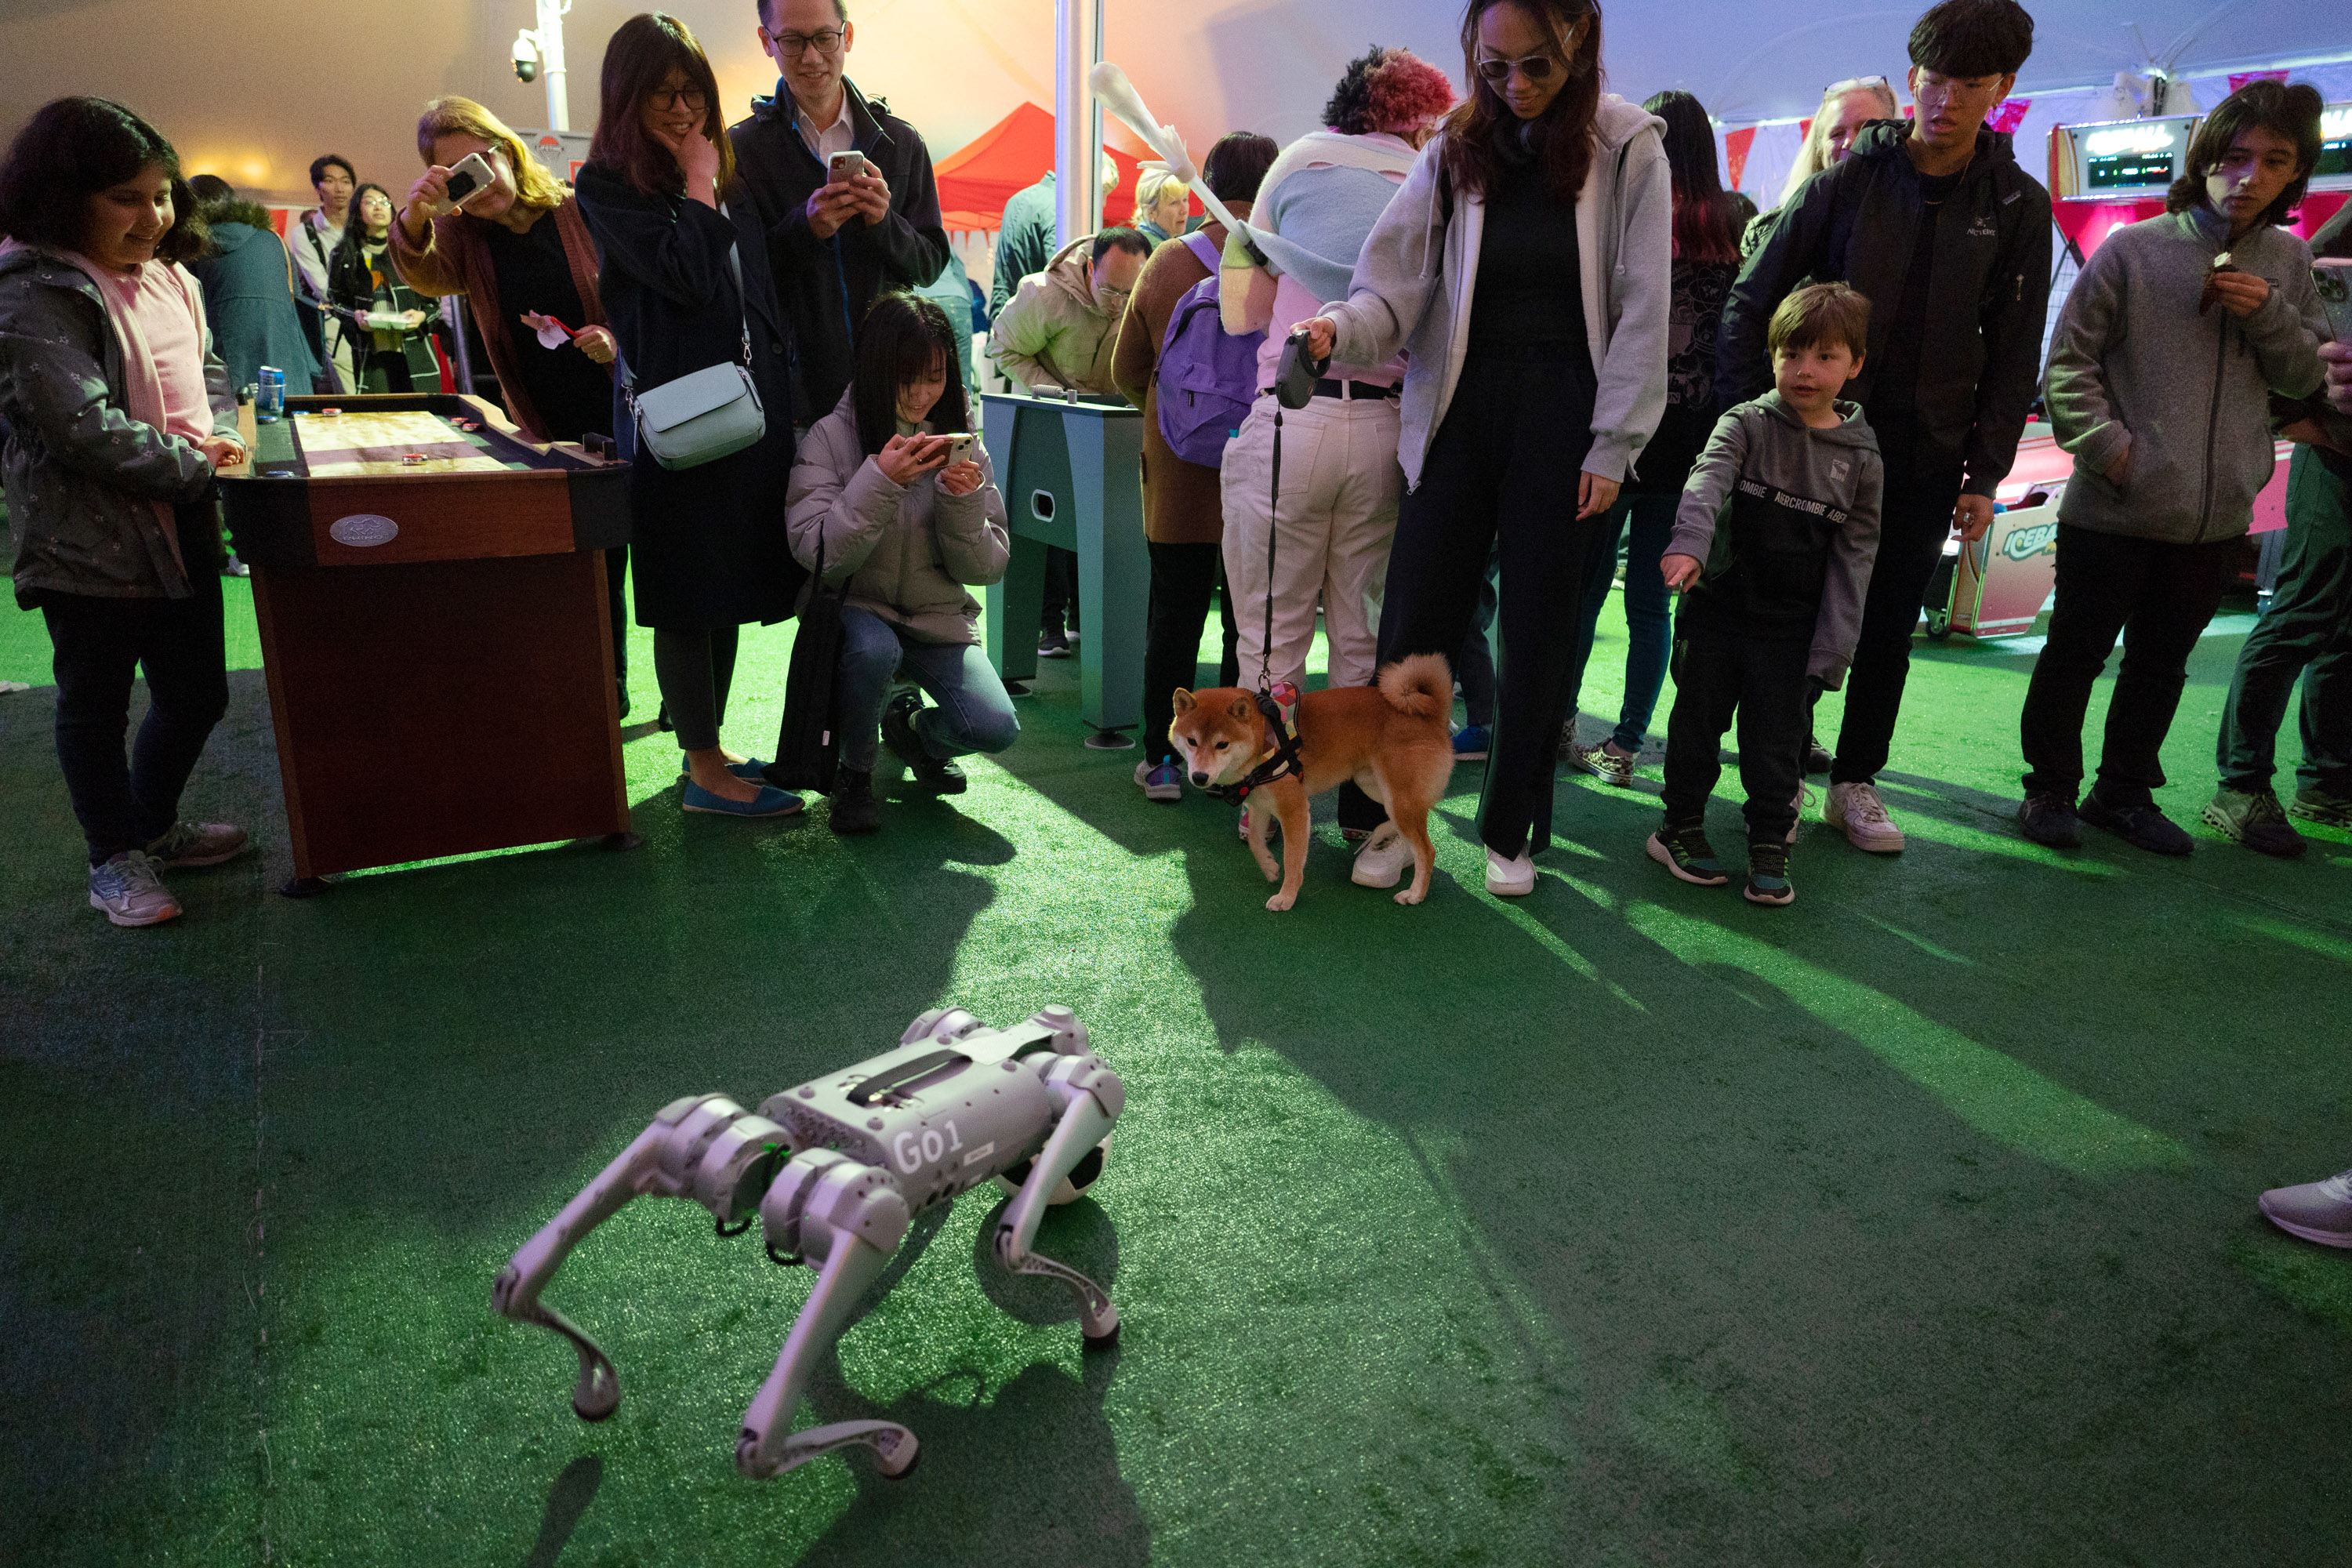 Dribblebot and a Shiba Inu dog face each other surrounded by people celebrating in a festive tent